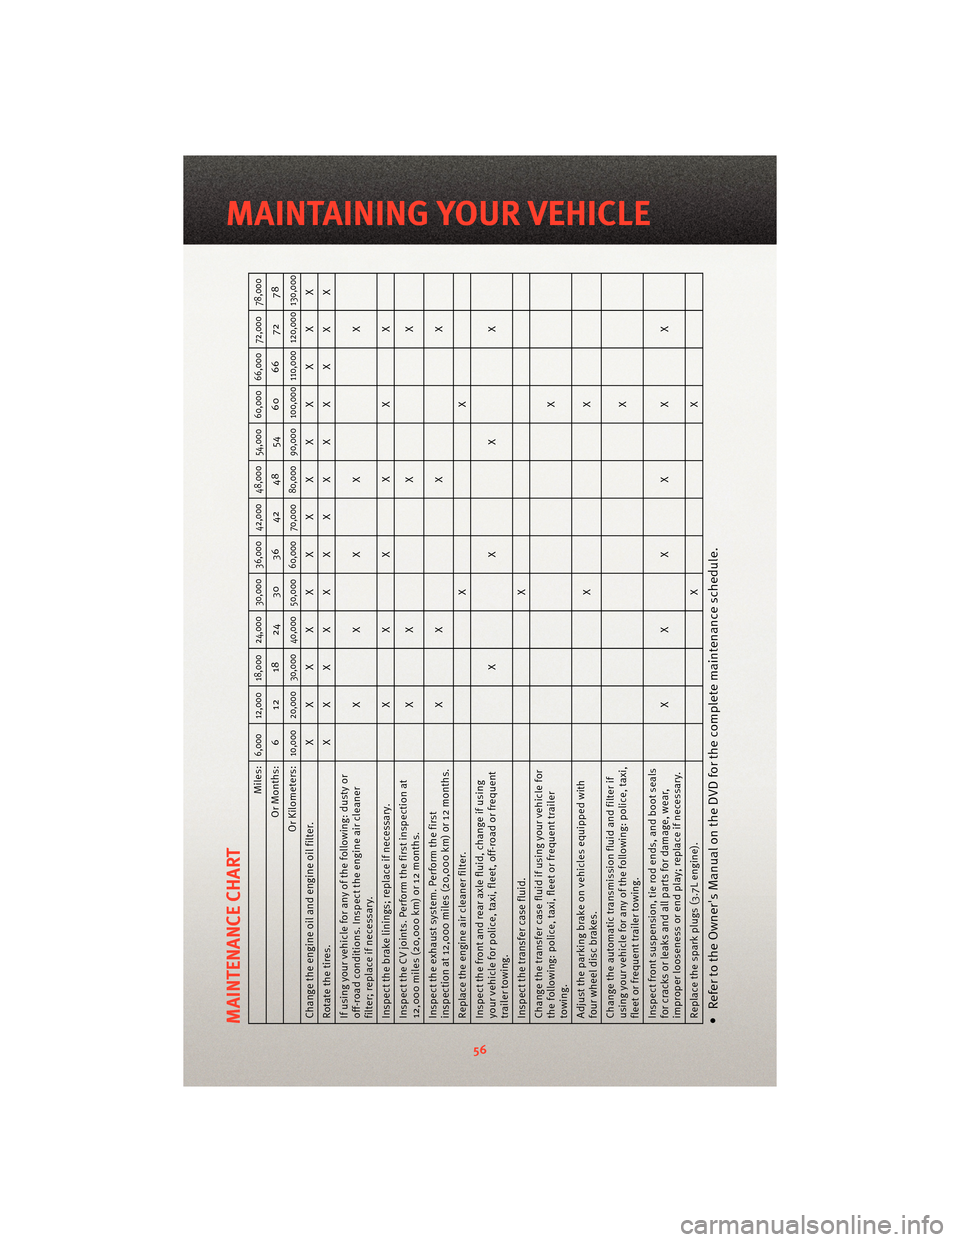 DODGE NITRO 2010 1.G Owners Manual MAINTENANCE CHART
Miles:
6,000 12,000 18,000 24,000 30,000 36,000 42,000 48,000 54,000 60,000 66,000 72,000 78,000
Or Months: 6 12 18 24 30 36 42 48 54 60 66 72 78
Or Kilometers:
10,000 20,000 30,000 